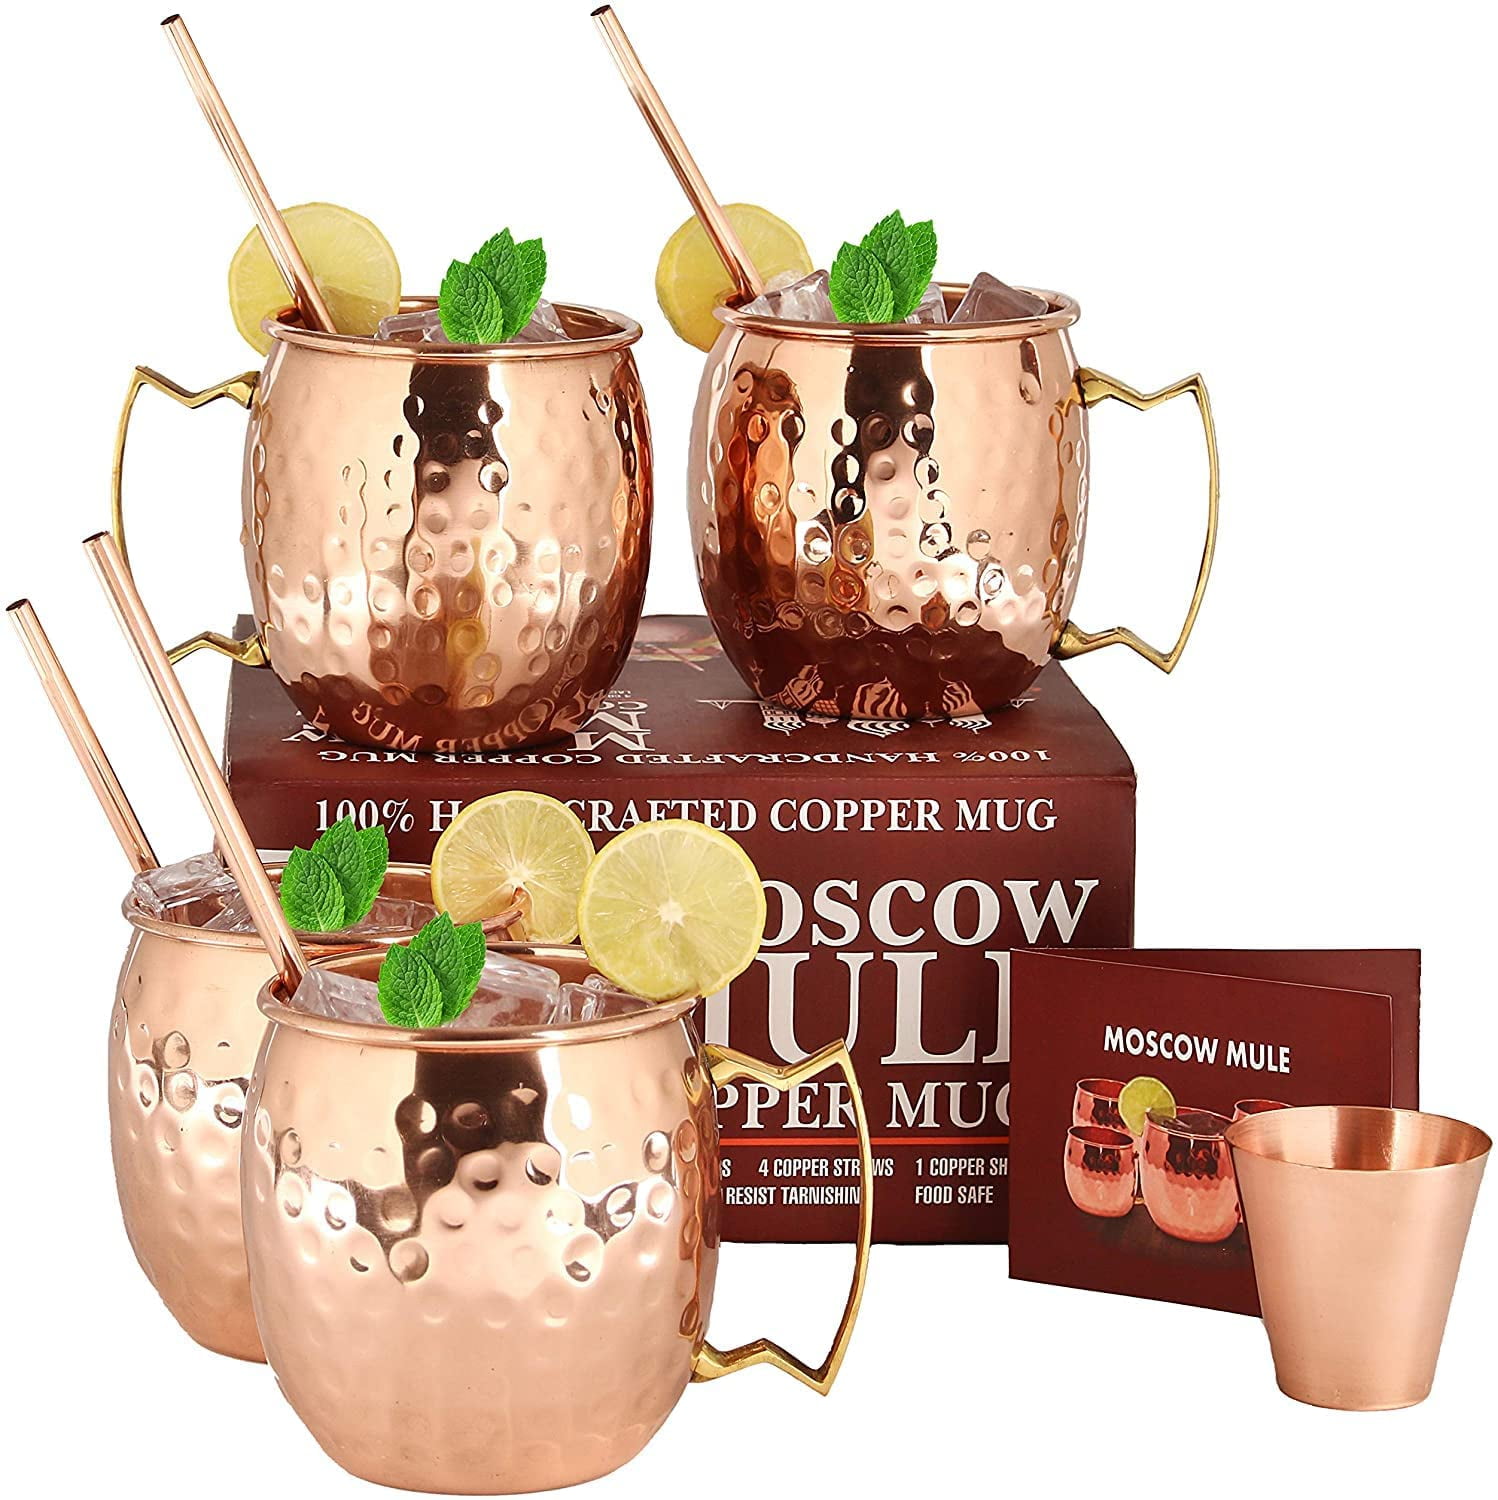 Moscow Mule Copper Mugs Set of 2 Cups 16 oz Each Solid Copper Drinking Cocktail Mug 